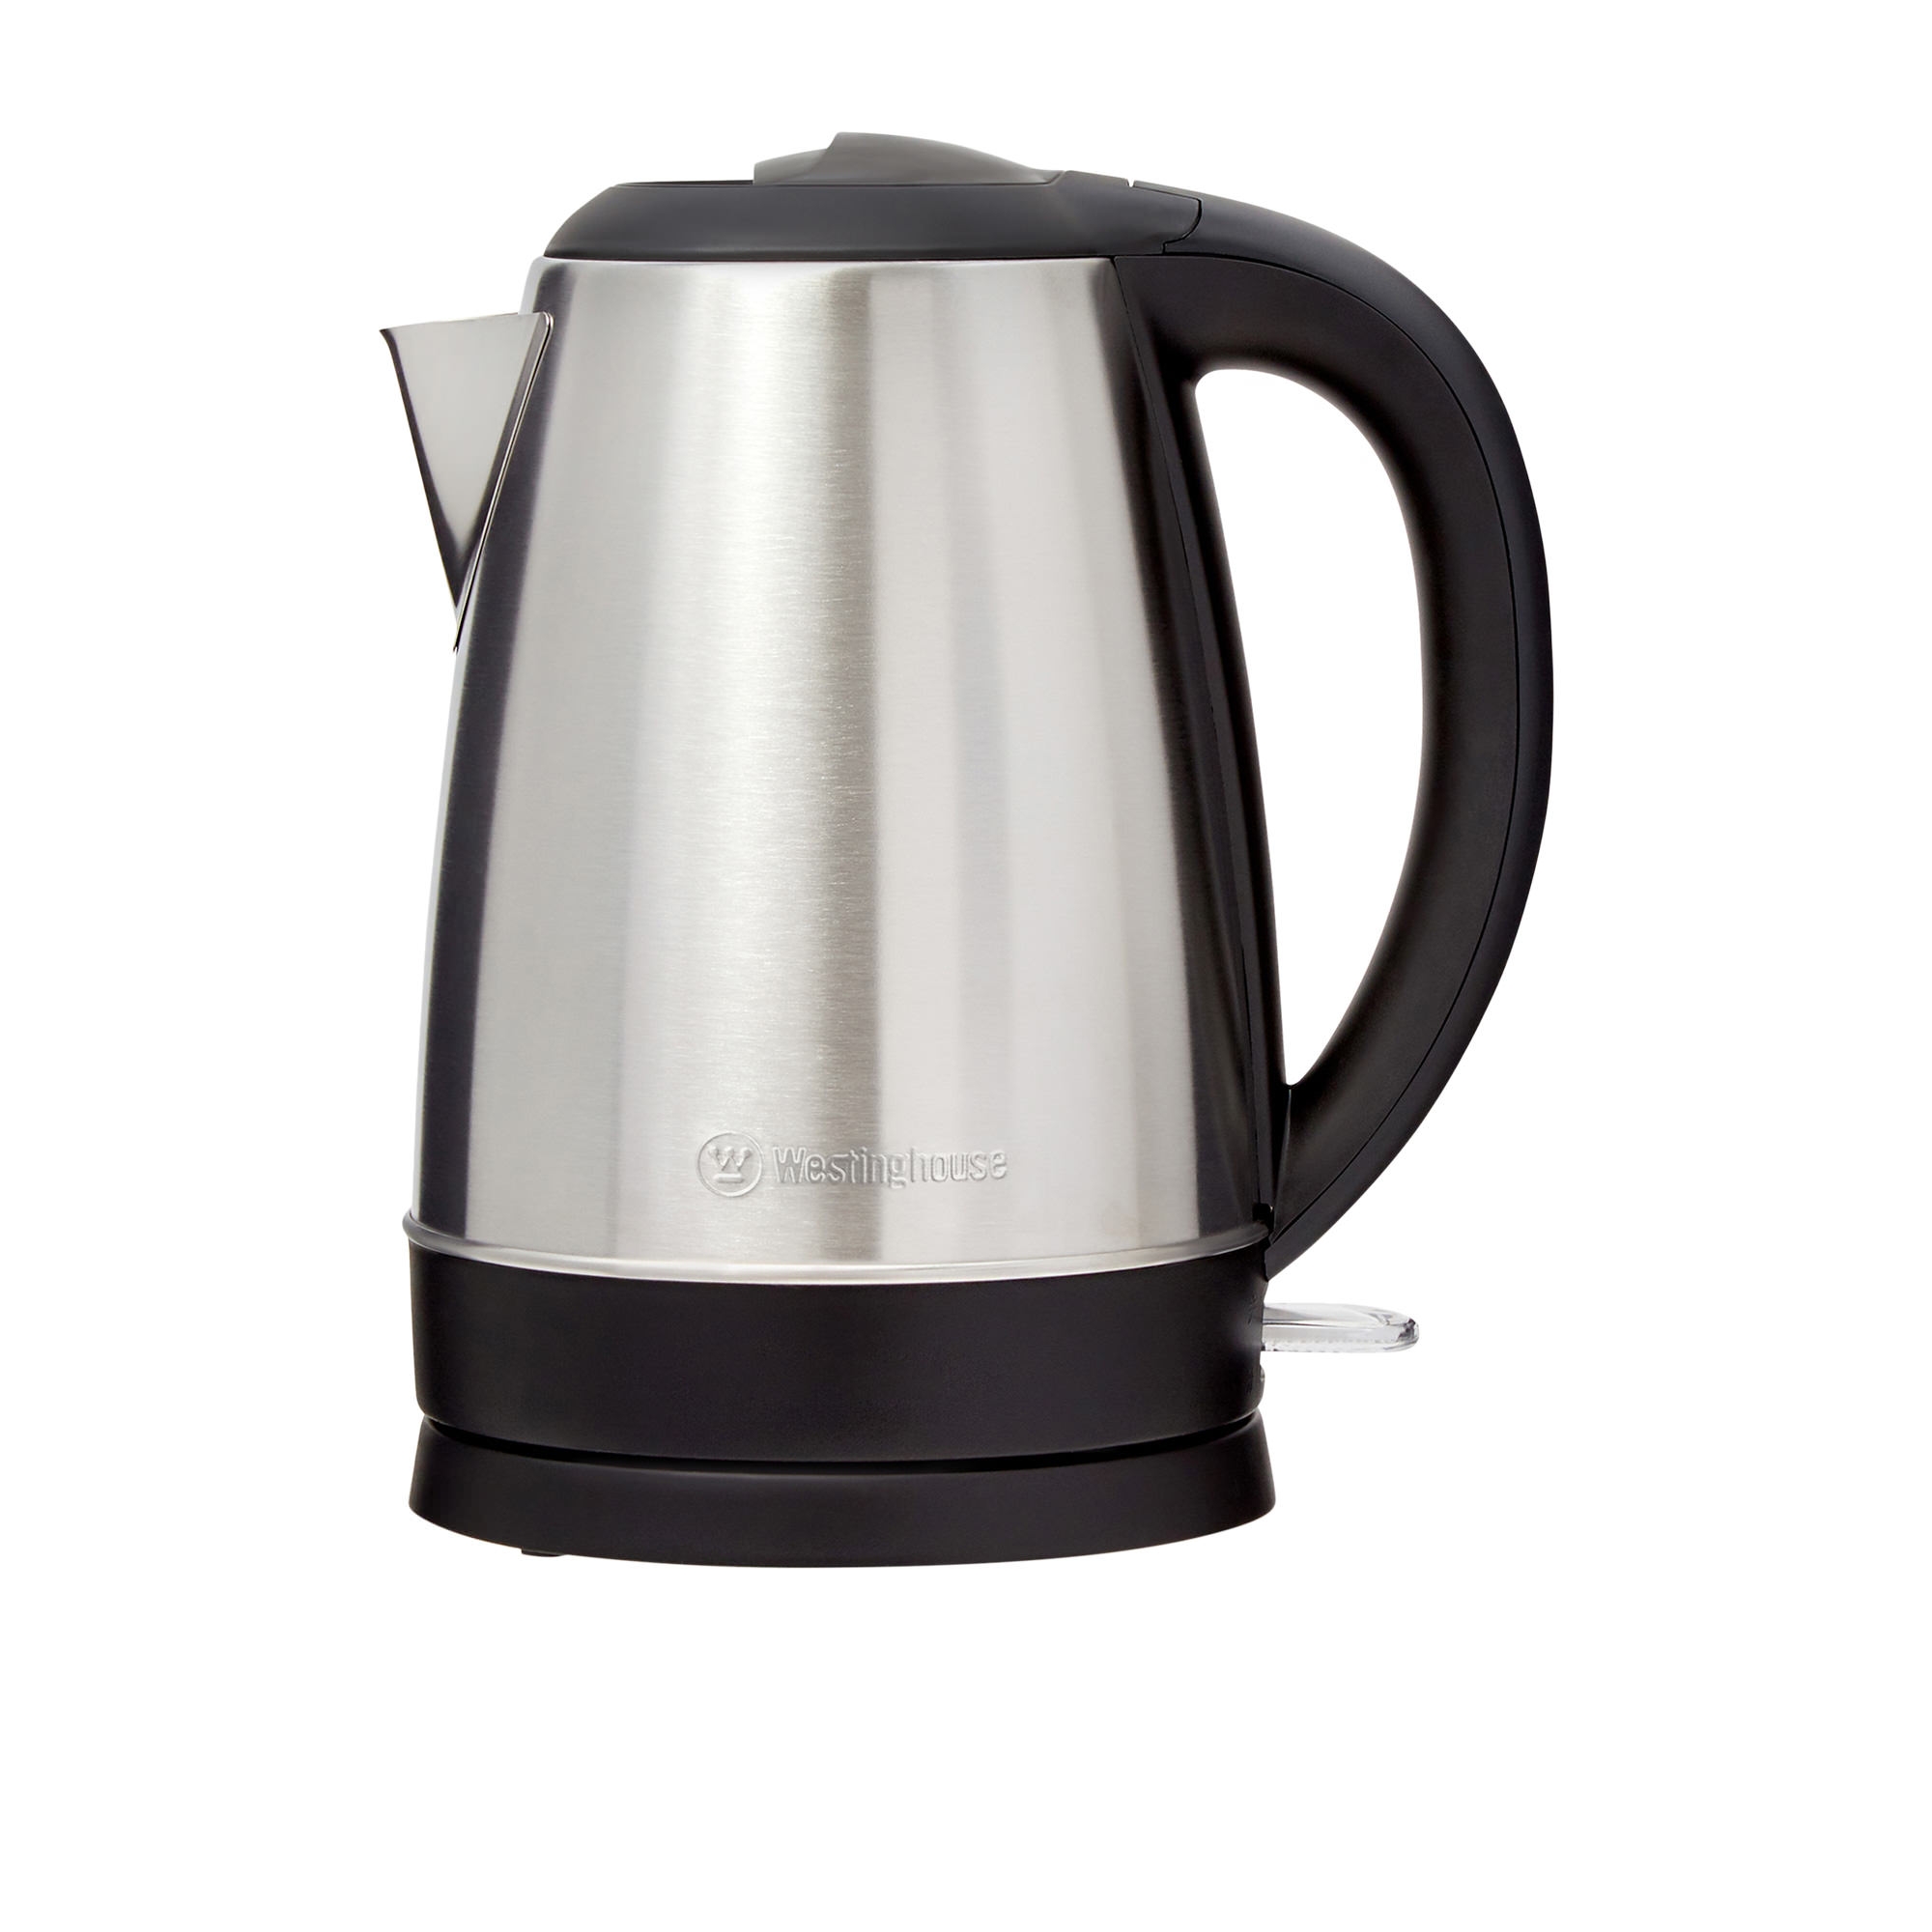 Westinghouse Stainless Steel Electric Kettle 1.7L Image 1